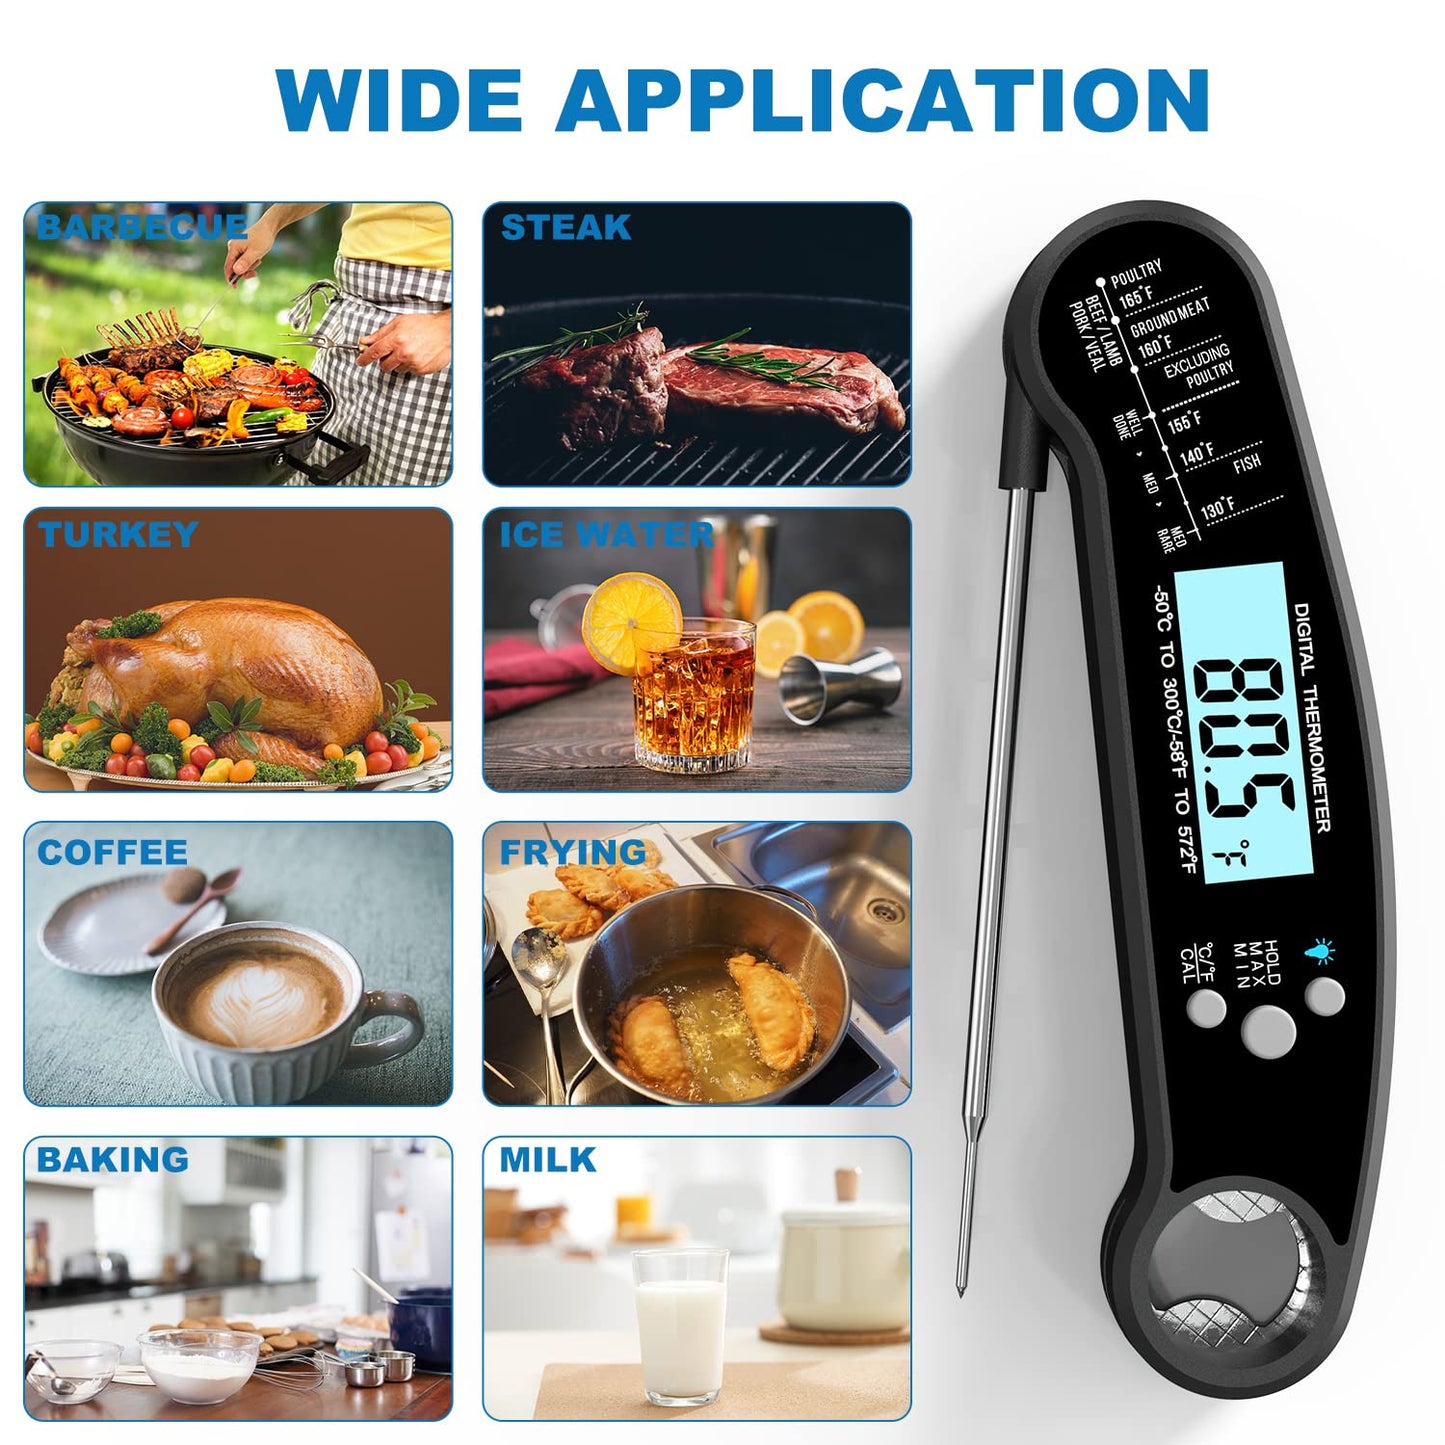 Meat Thermometer with Probe - Instant Read Waterproof Kitchen Digital Food Thermometer for Cooking, Baking, Liquids, Candy, Grilling BBQ & Air Fryer